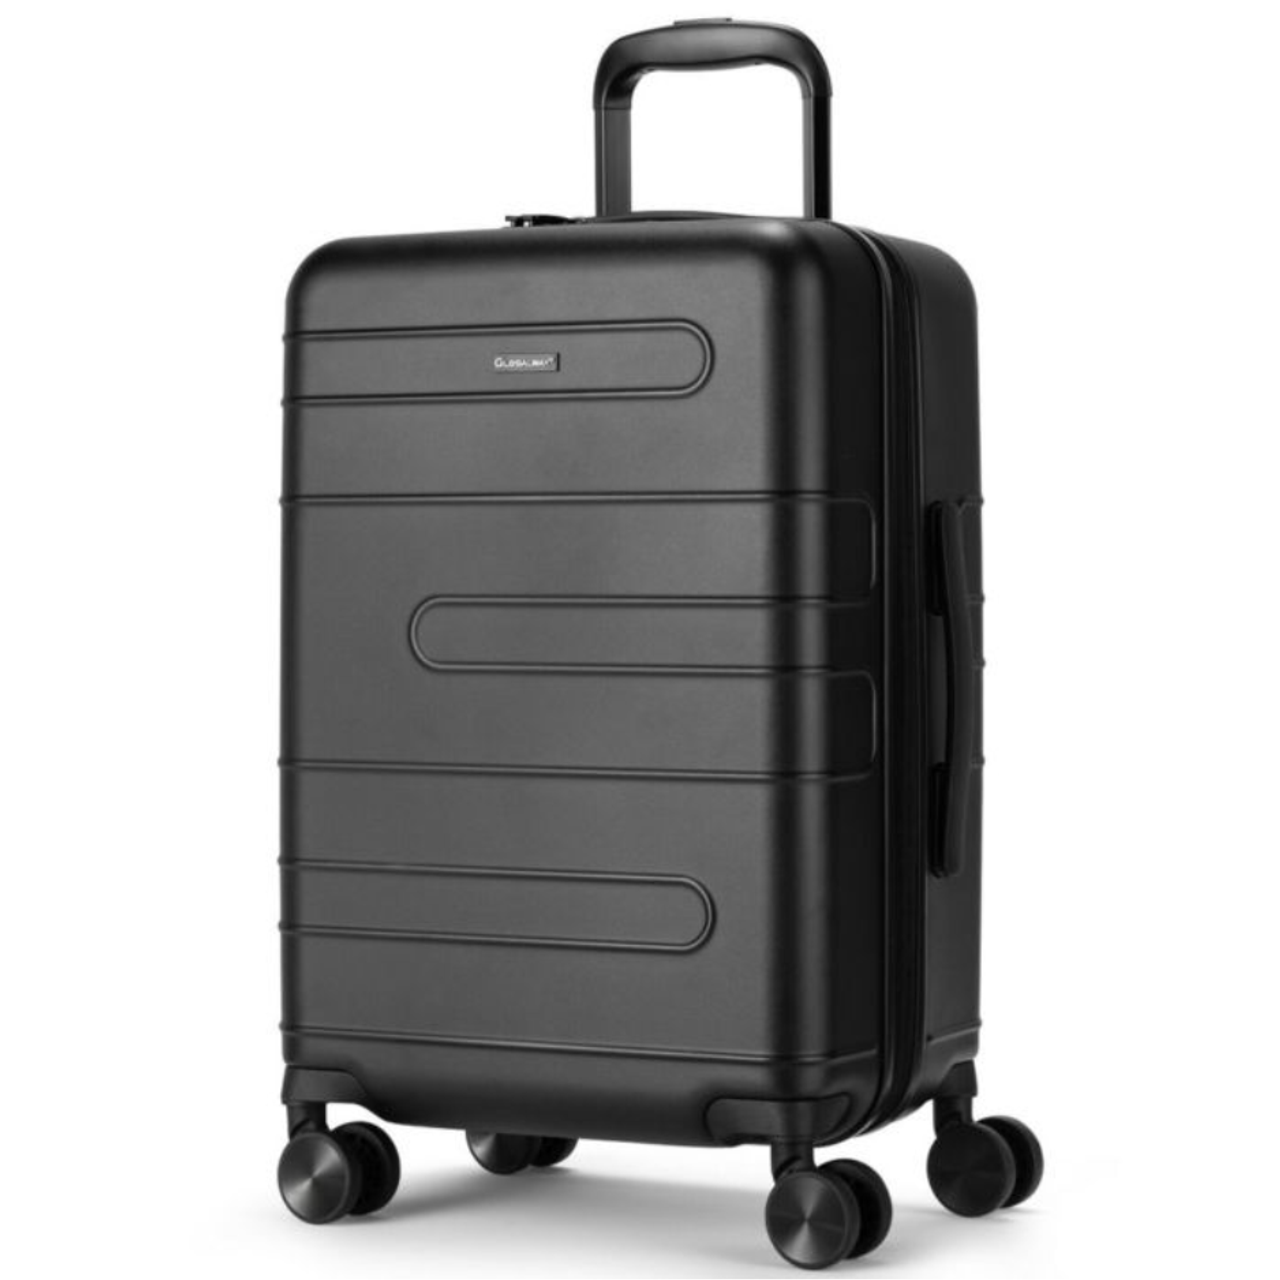 20-Inch Carry-on Hardside Suitcase with TSA Lock and Front Pocket product image